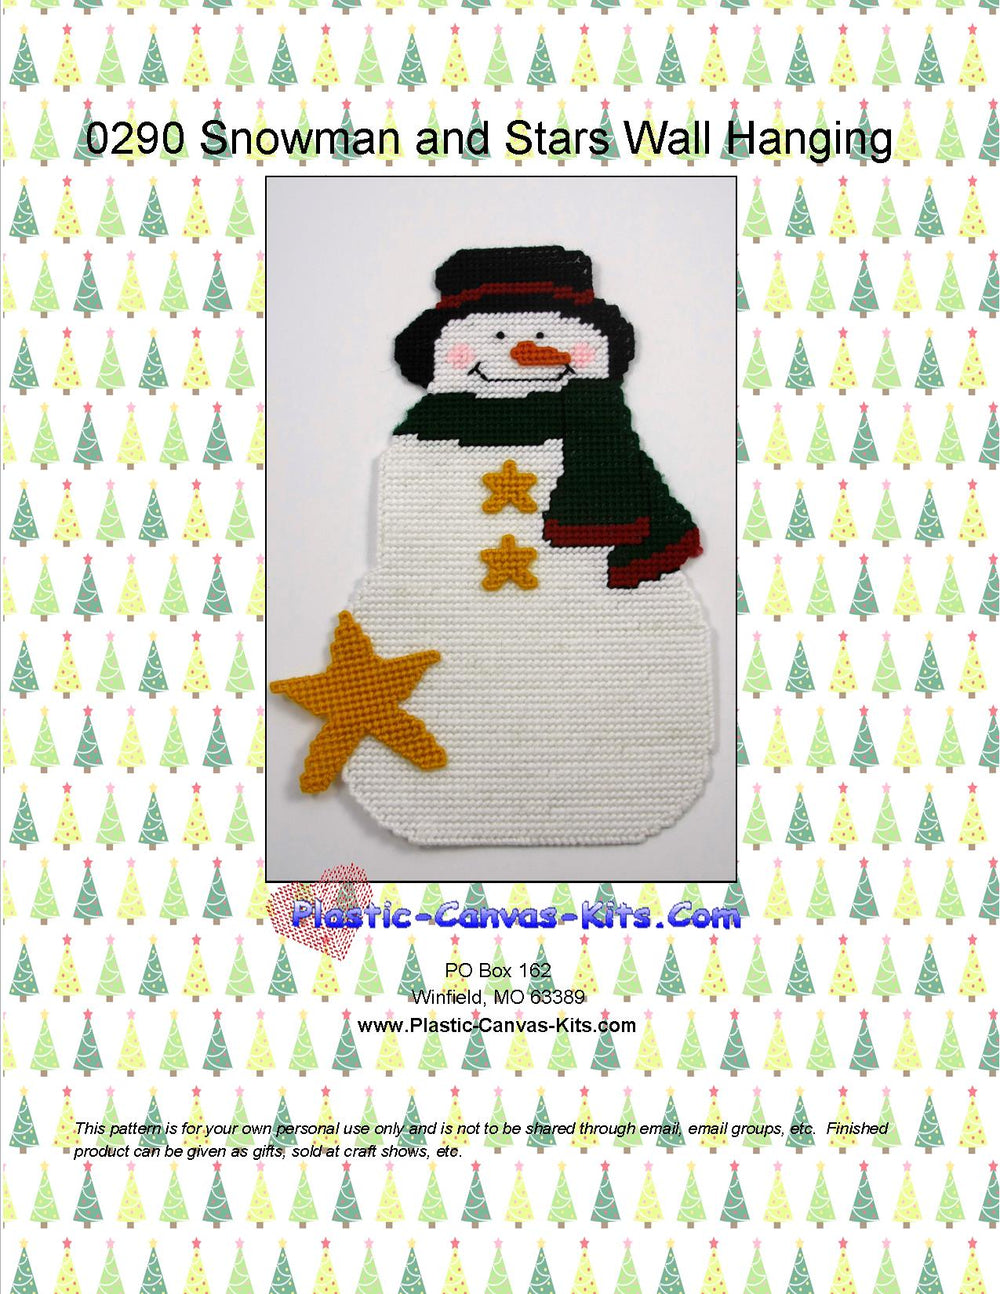 Snowman and Stars Wall Hanging